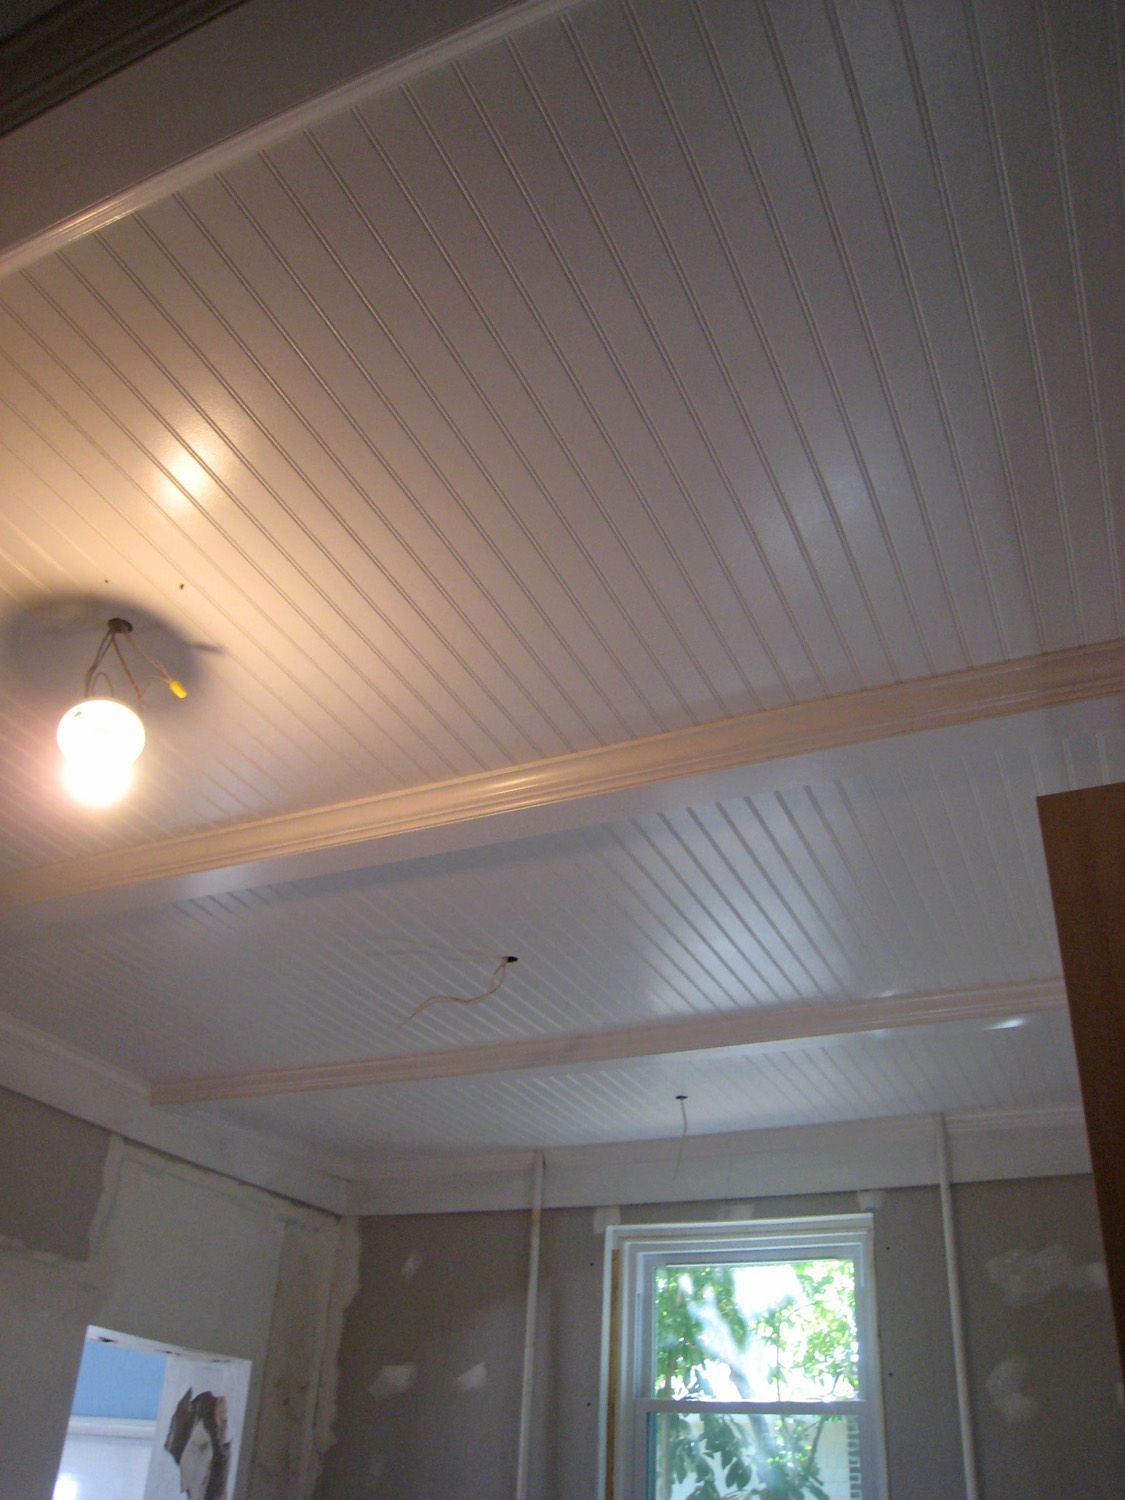 basement ceiling idea. remove drop ceiling, paint beams white and put up bead board panels between beams.